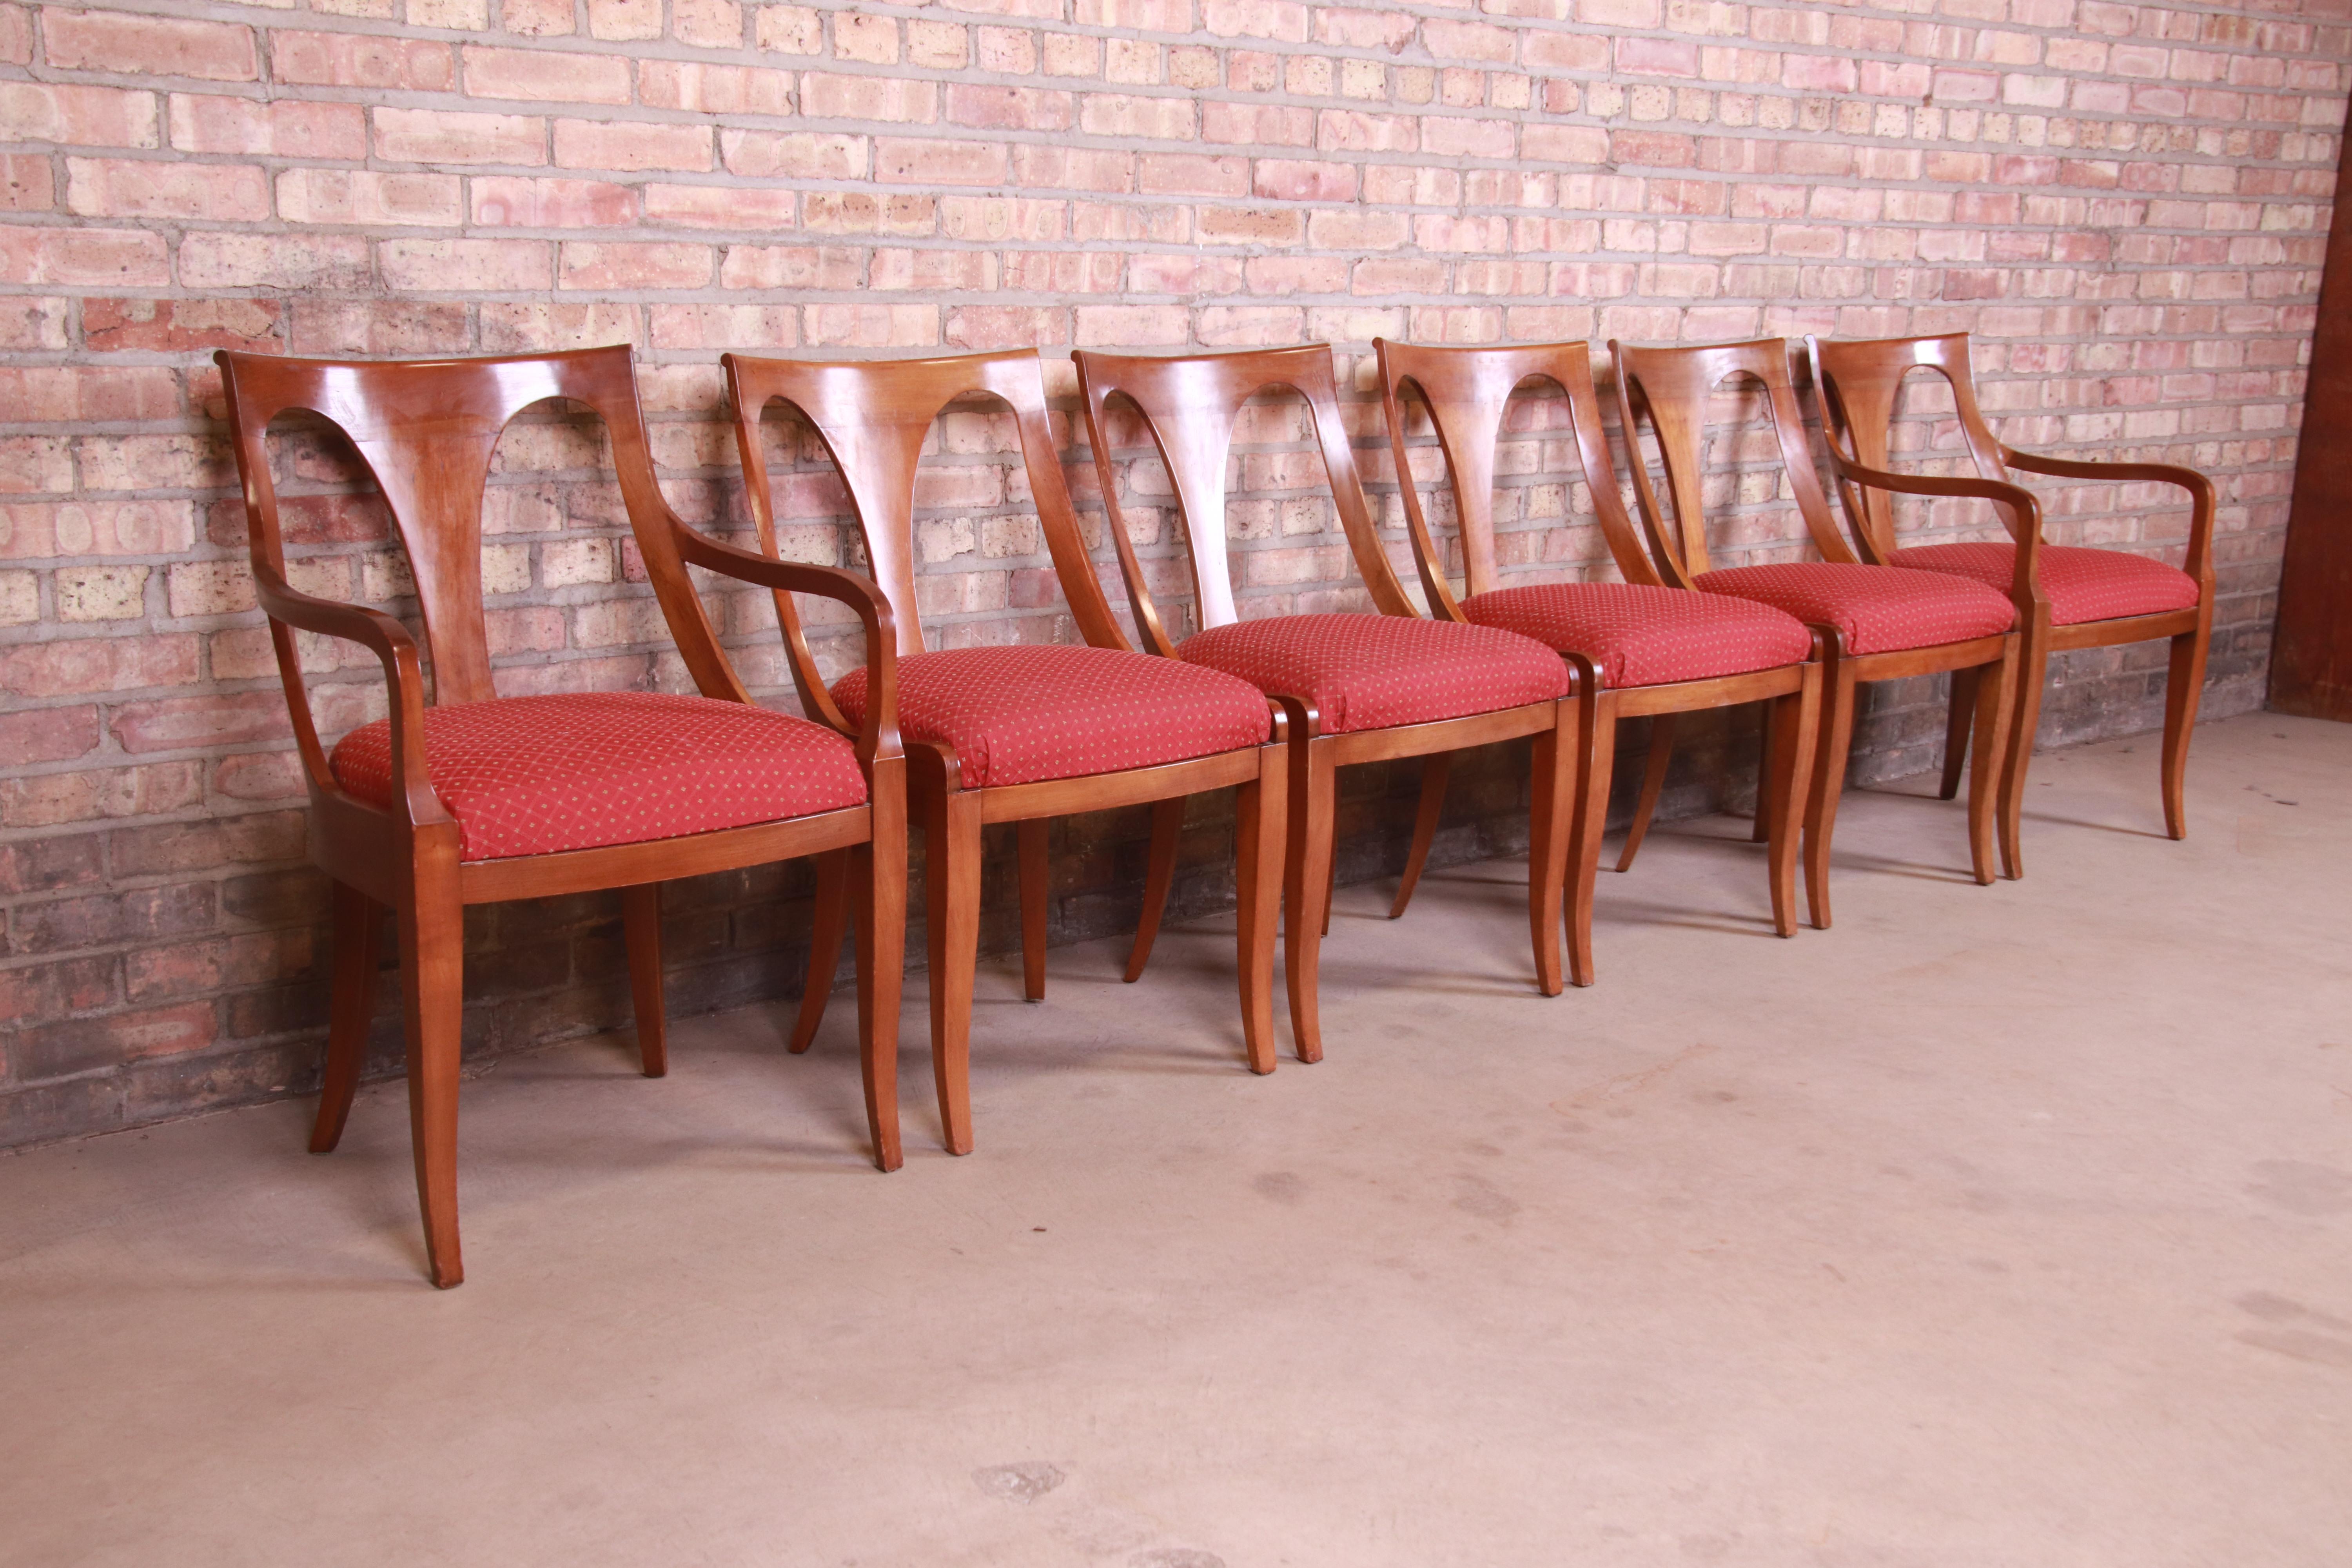 Upholstery Kindel Furniture Regency Cherry Wood Dining Chairs, Set of Six